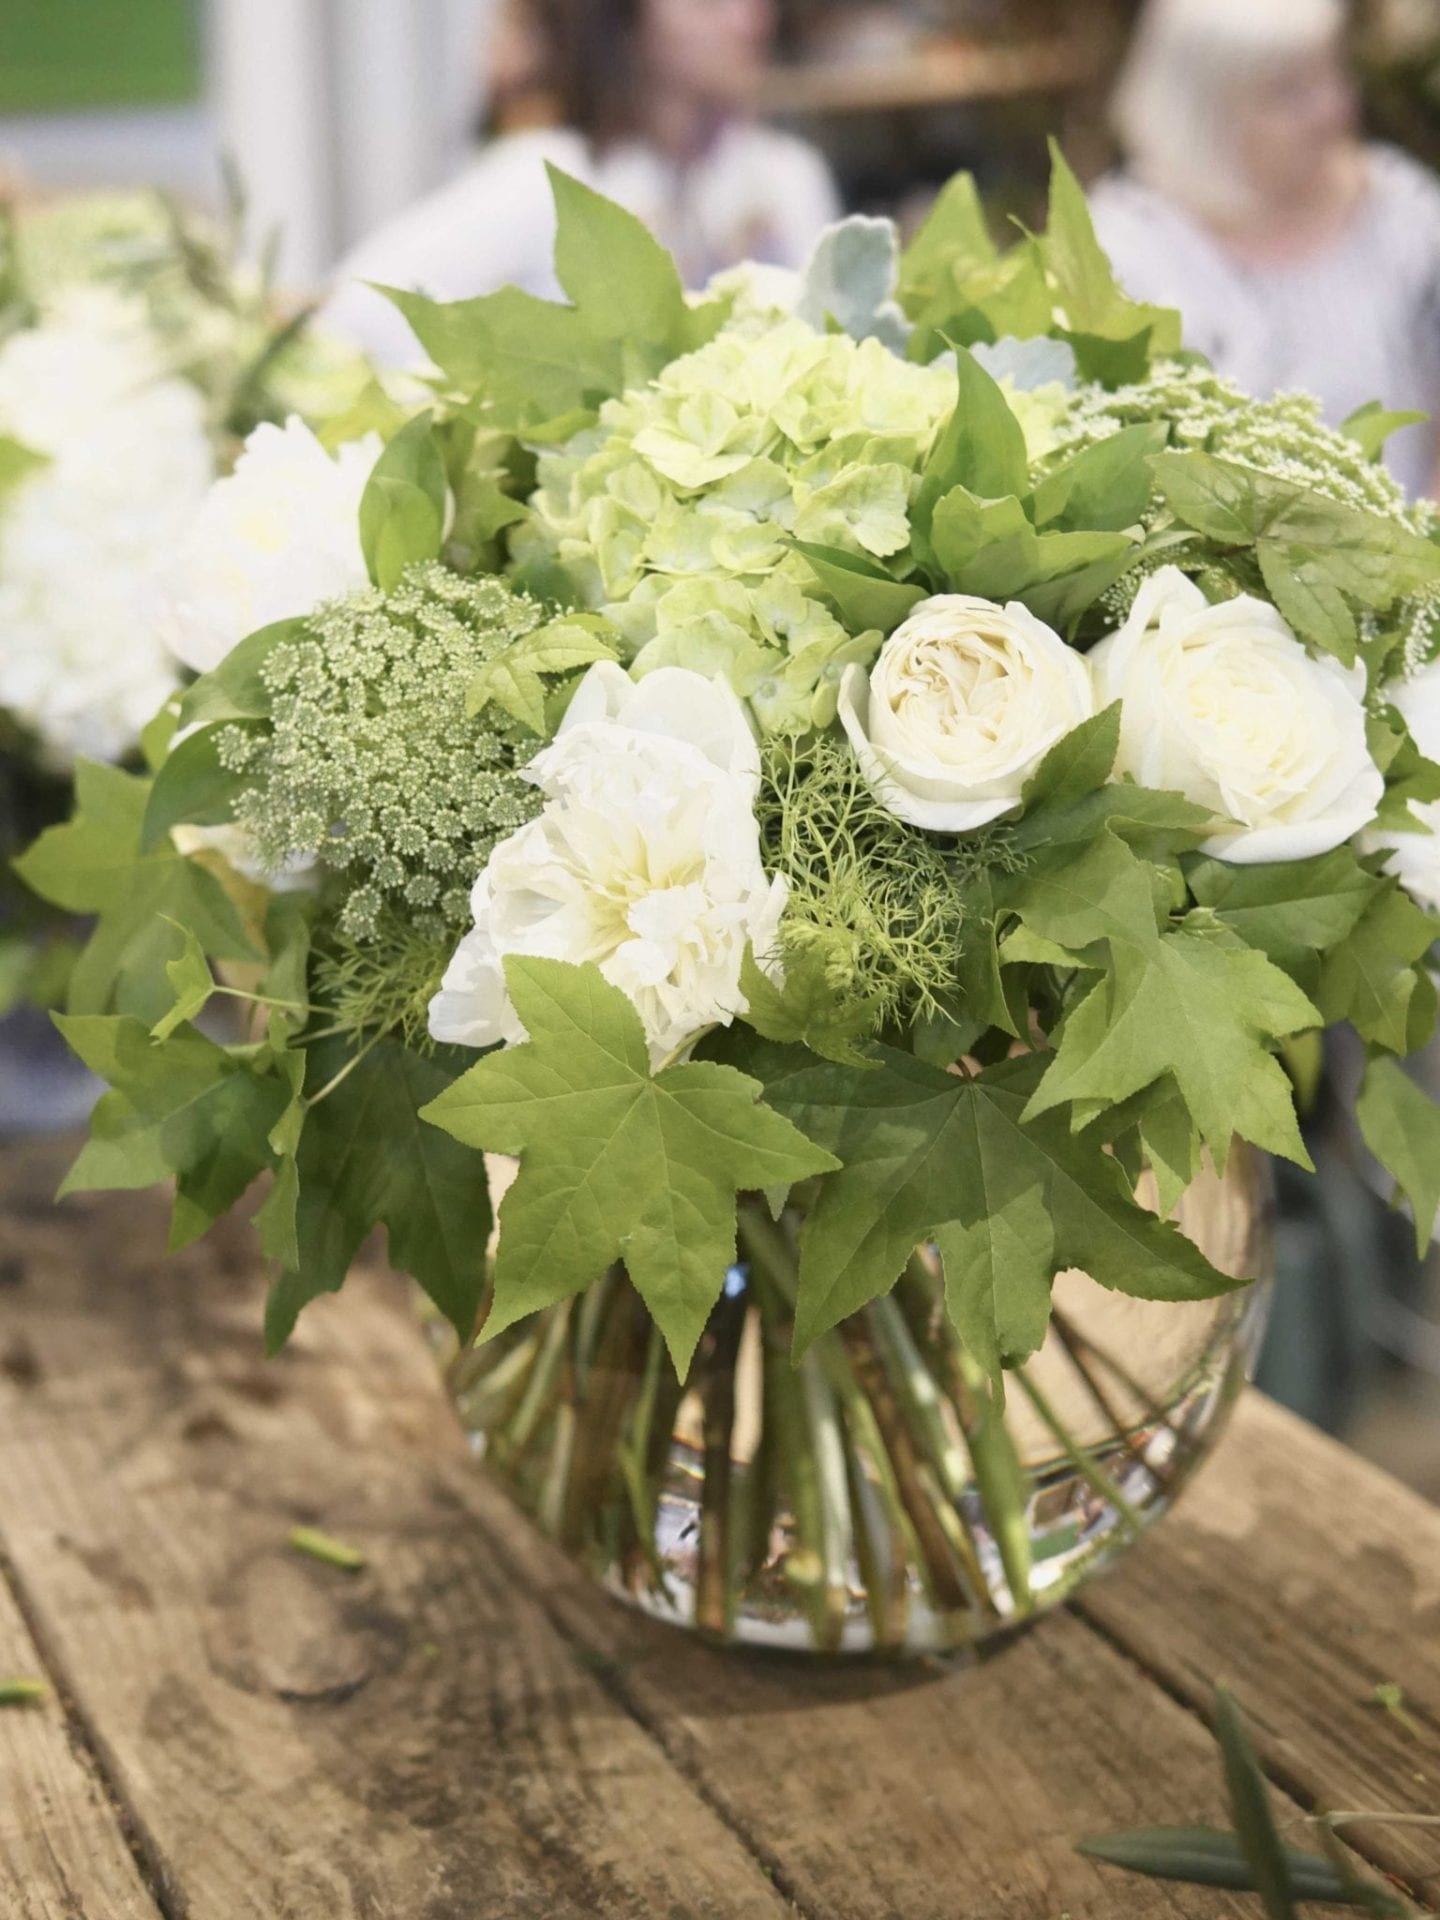 How to make 5 different floral arrangements with fake flowers. White and Green flower arrangement.